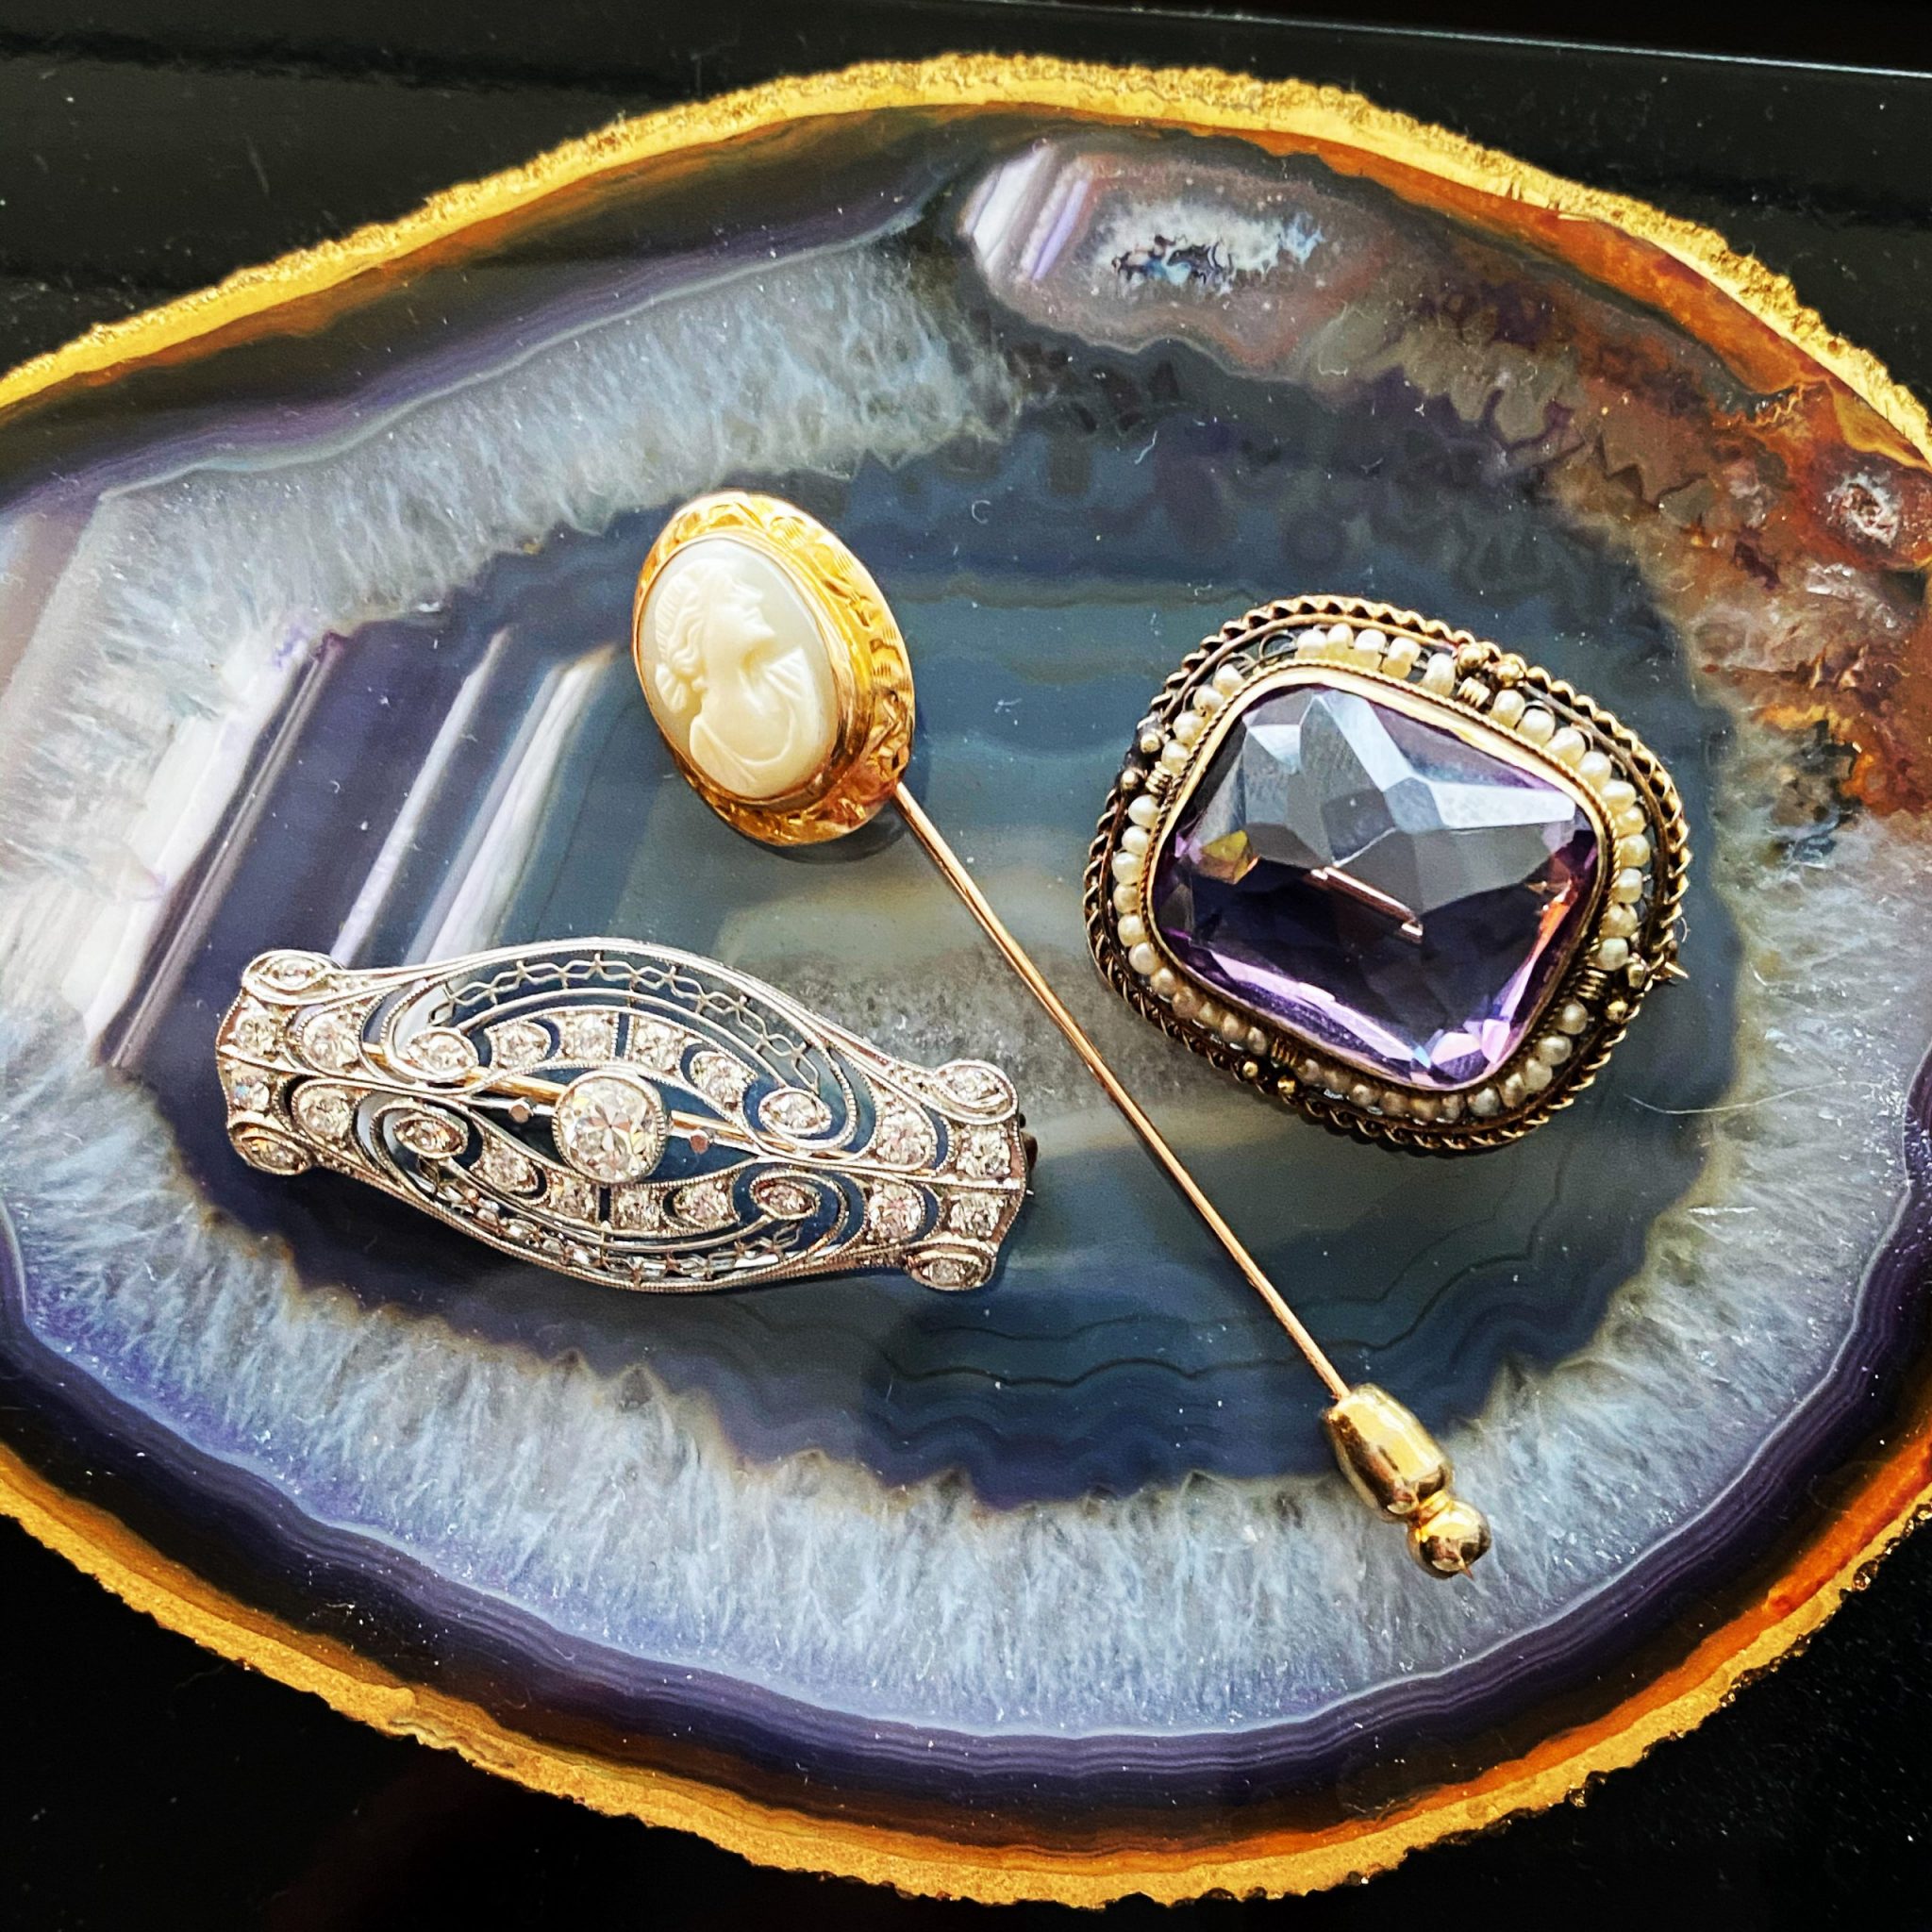 What kind of brooch gal are you?